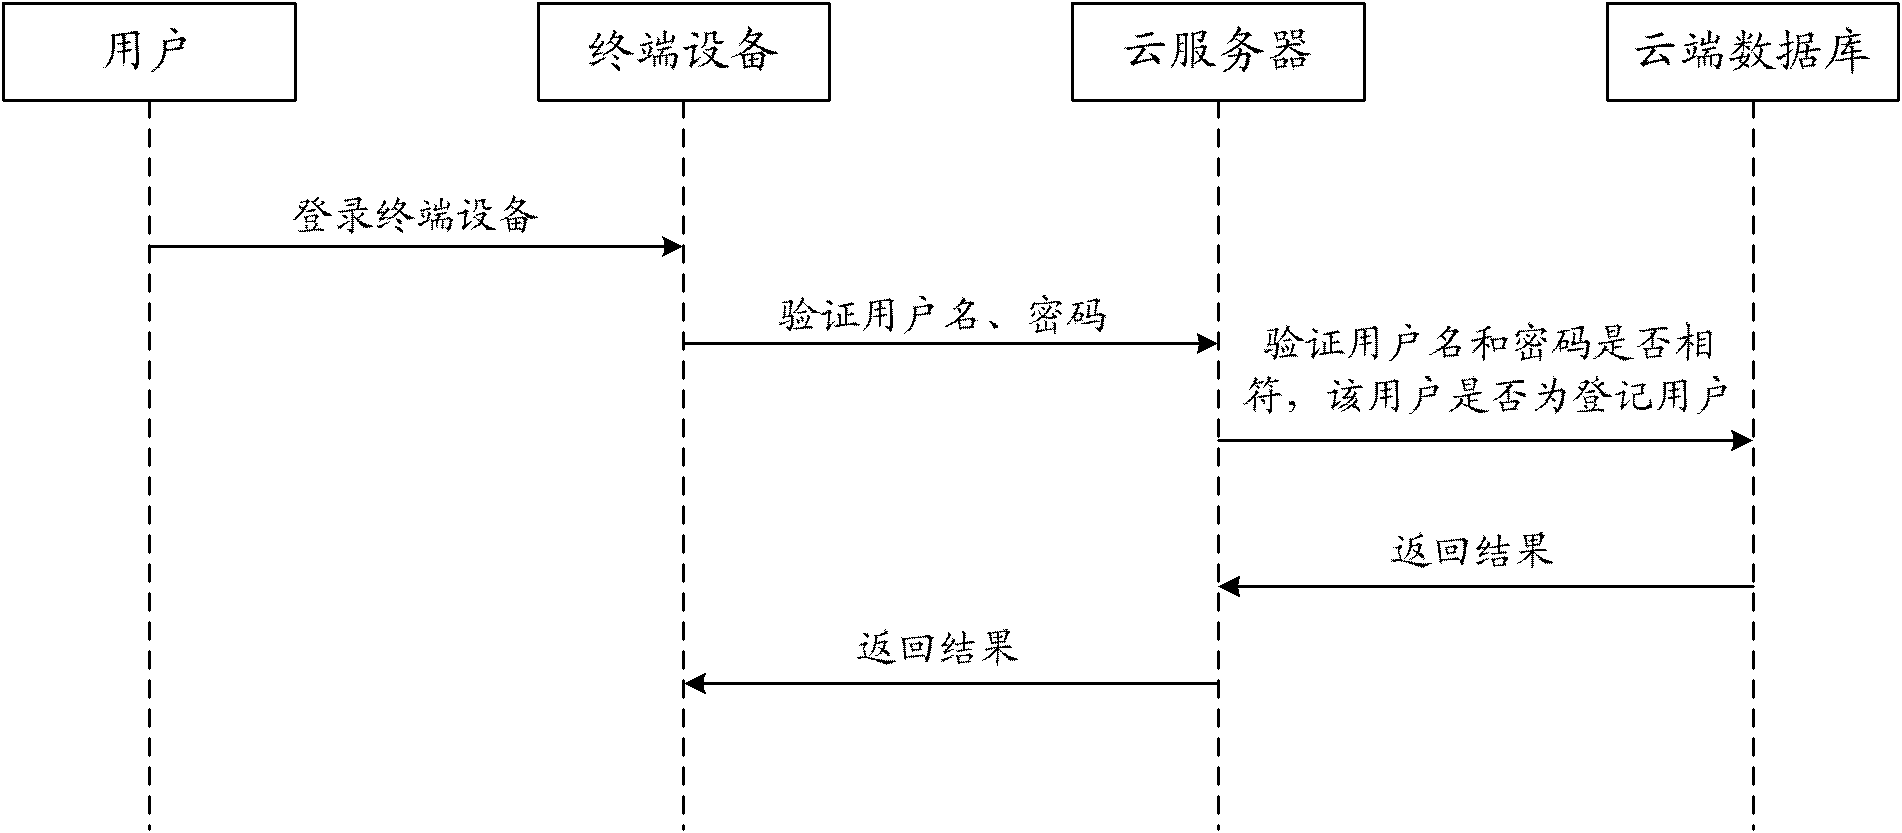 Electronic payment method based on cloud data processing technology